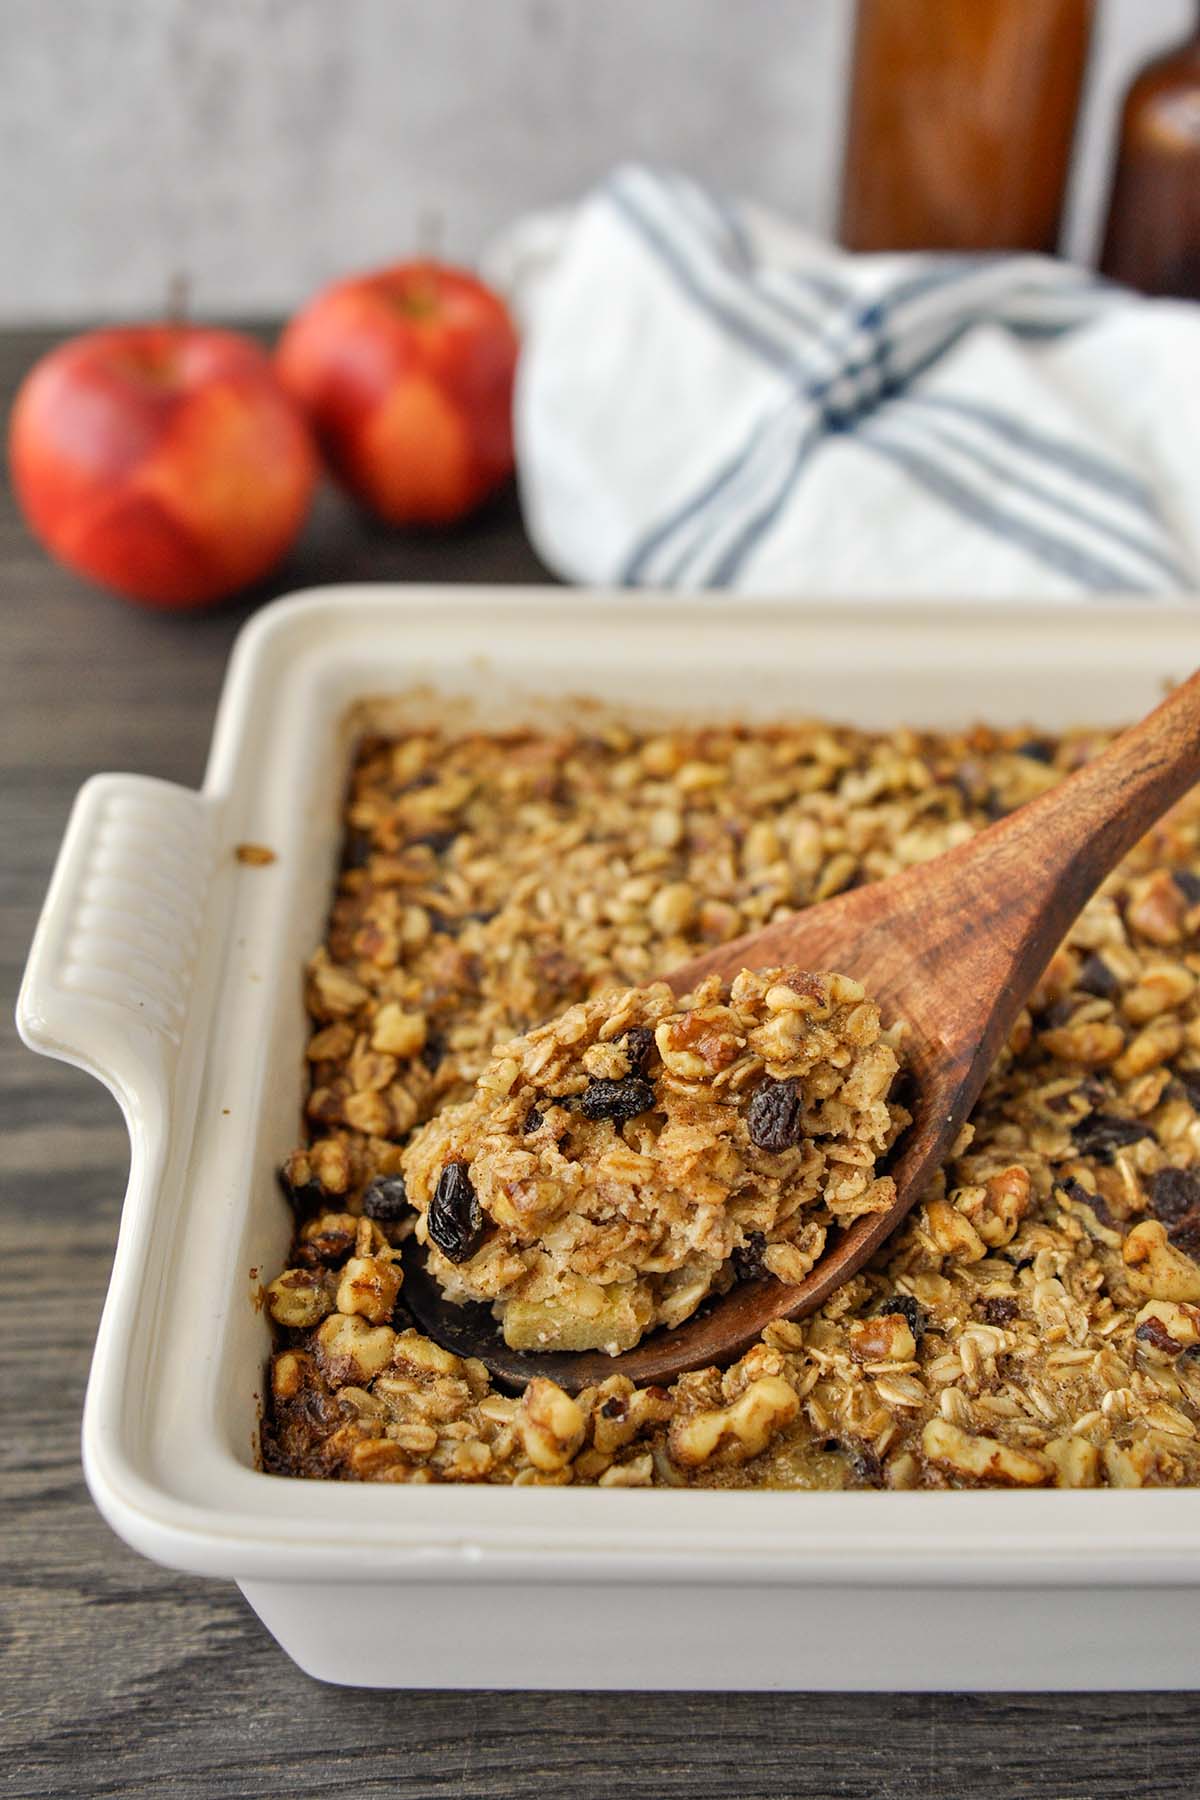 A spoonful of baked oatmeal in a pan of the oatmeal with a towel and apples in the background.